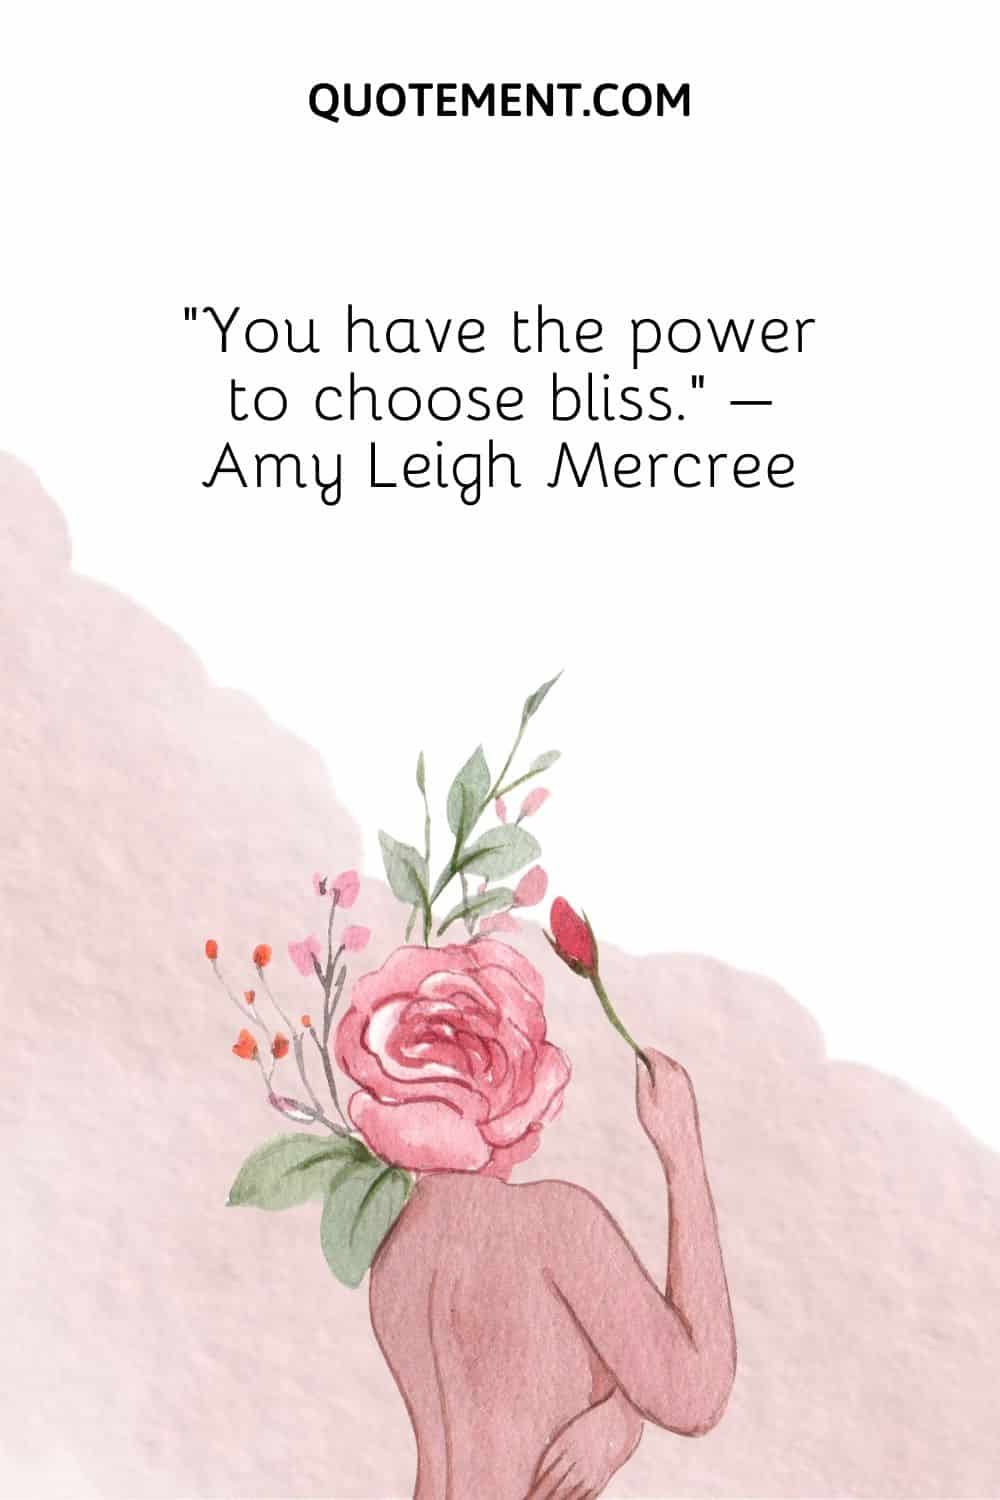 You have the power to choose bliss. – Amy Leigh Mercree